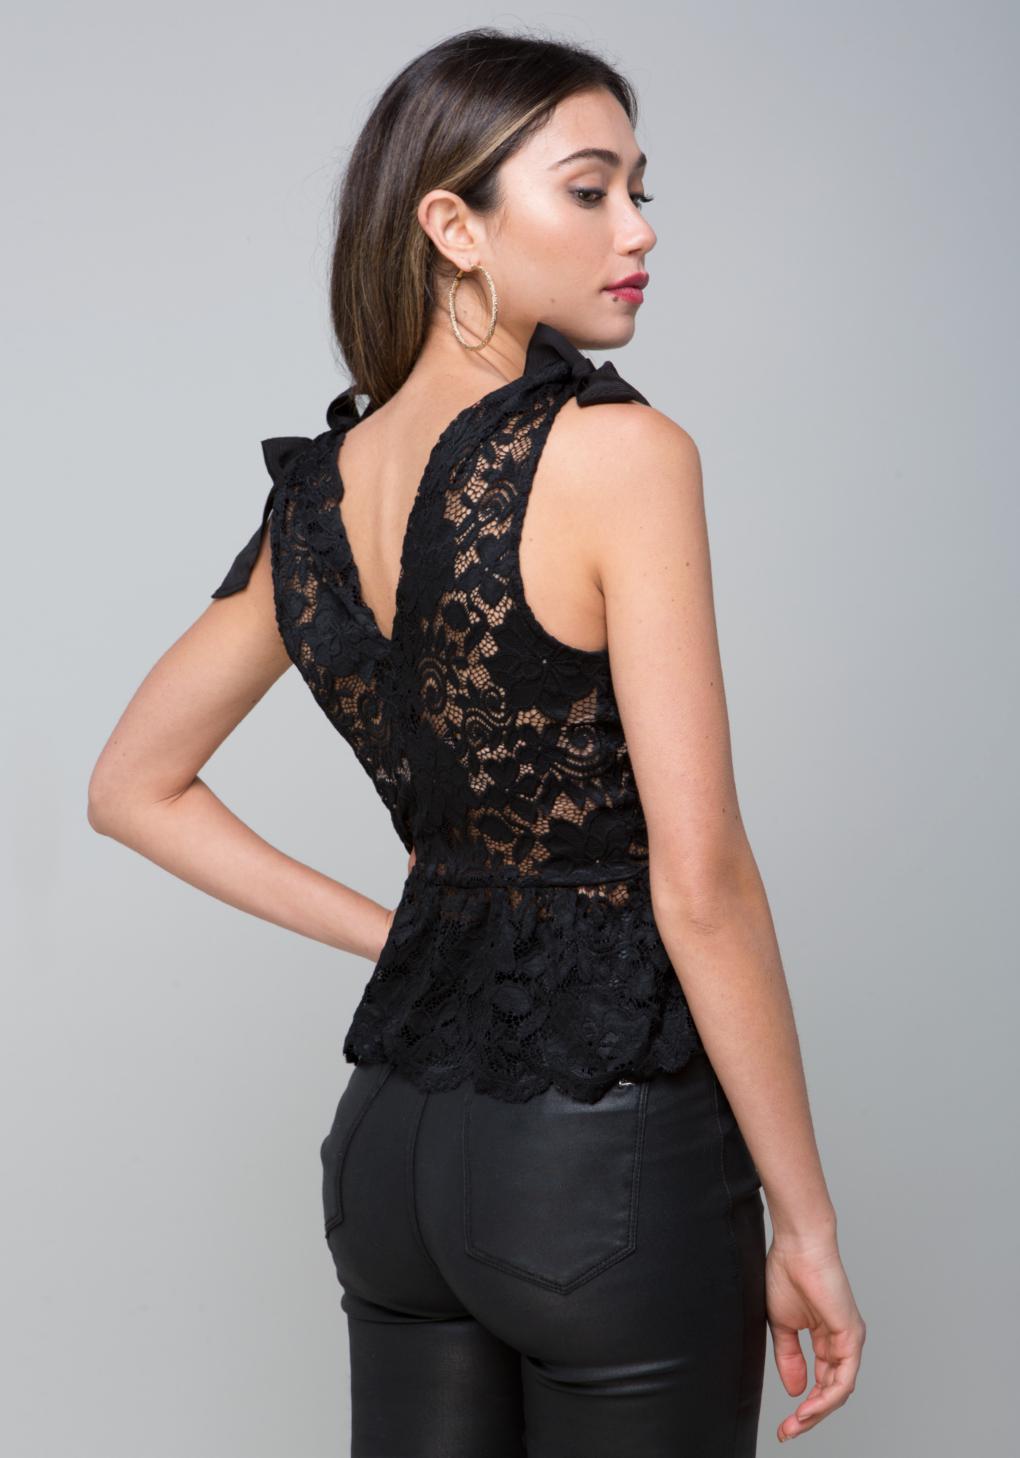 Lyst - Bebe Lace Double V-neck Top in Black